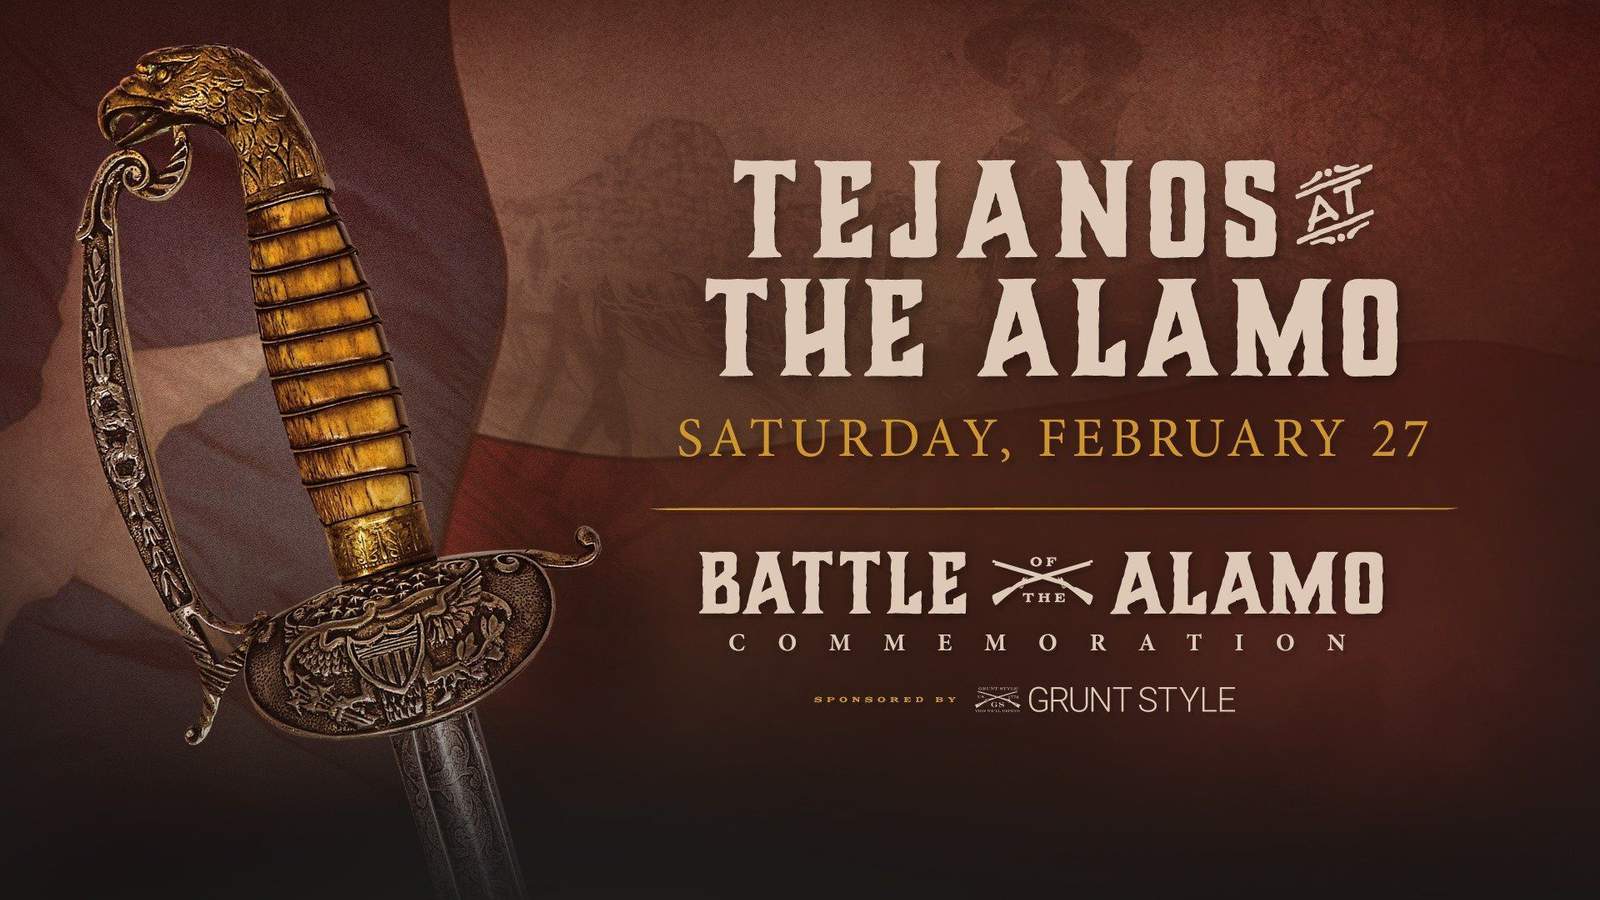 WATCH: The Alamo honors Tejano heroes of the Texas Revolution